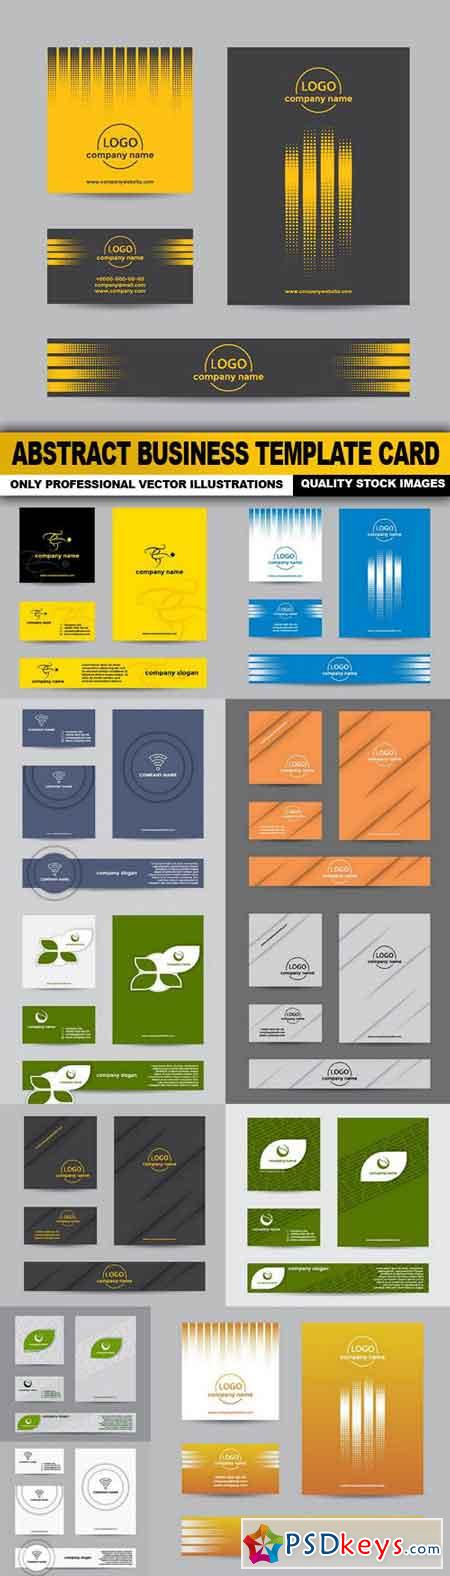 Abstract Business Template Card - 12 Vector